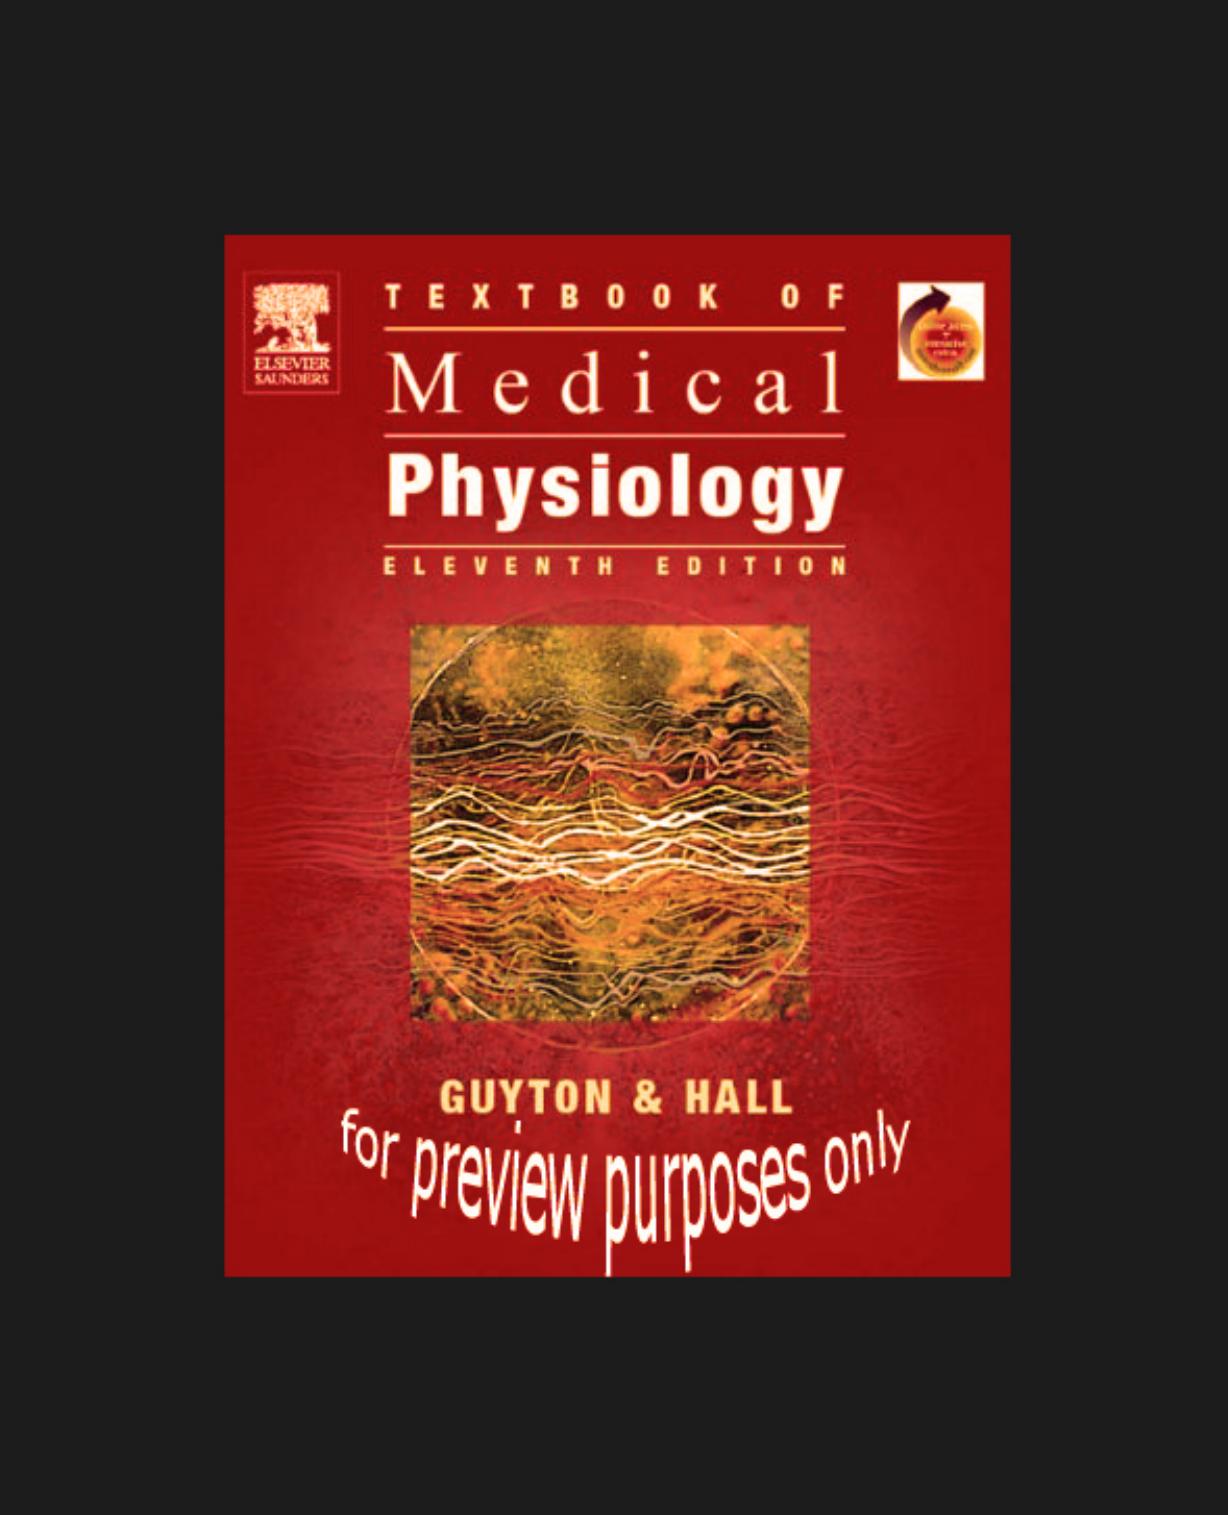 TEXTBOOK of Medical Physiology